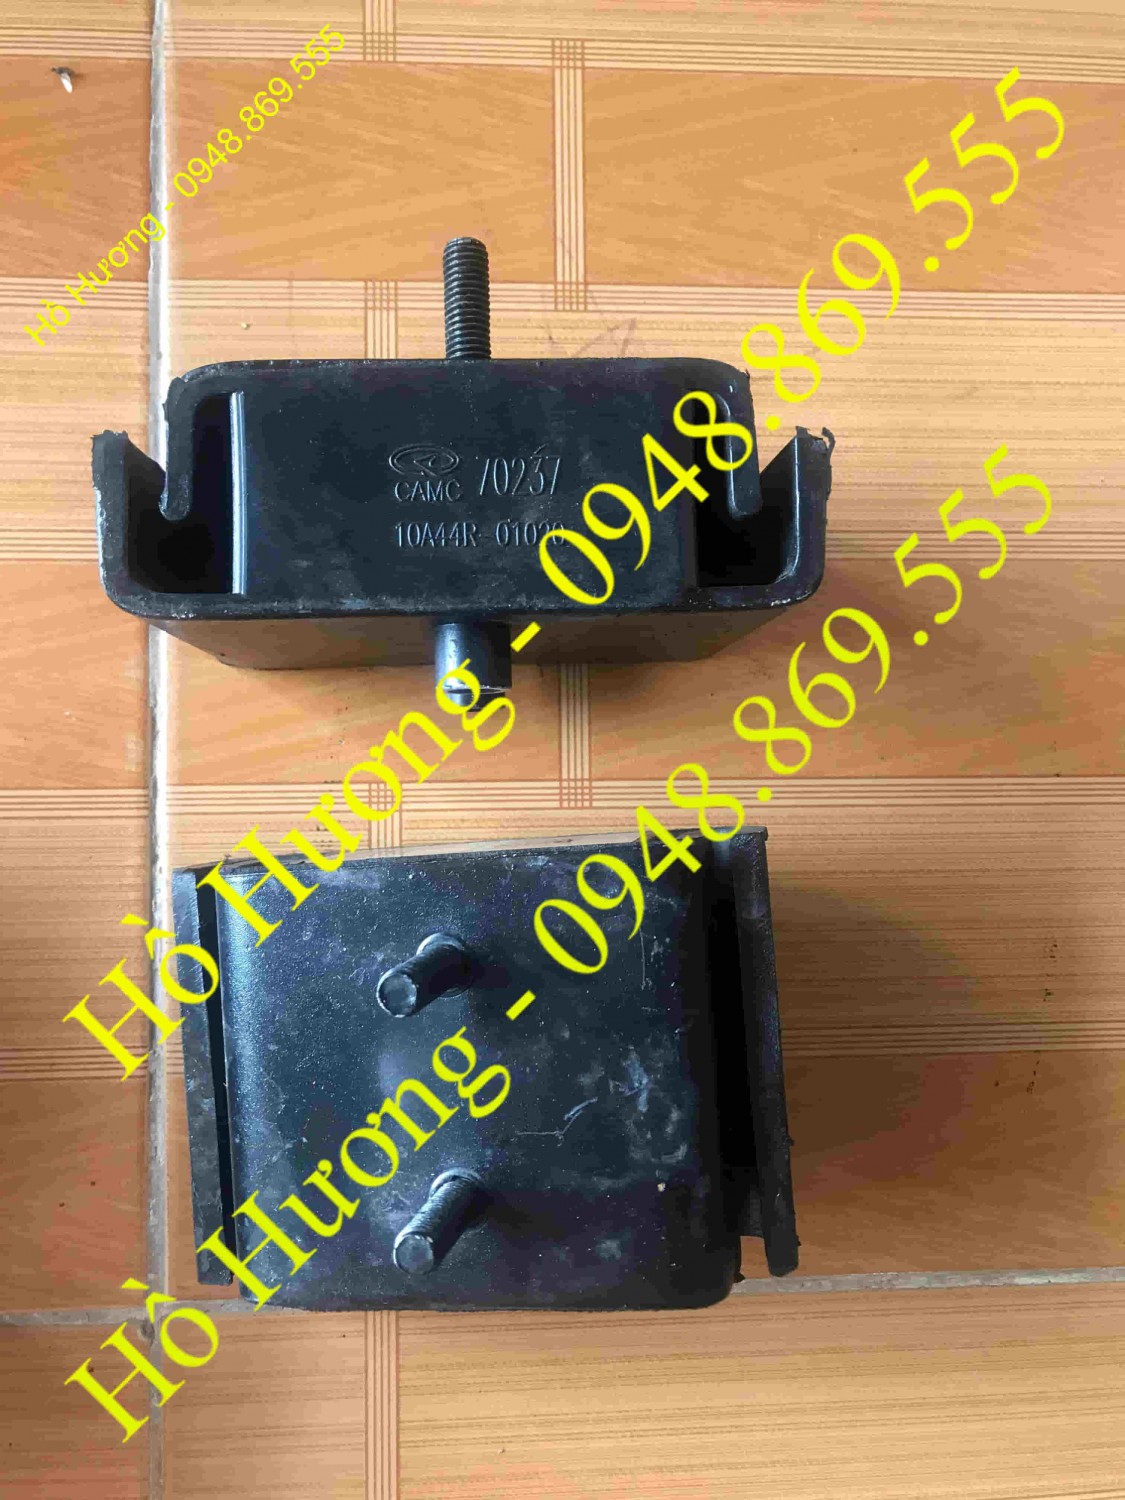 chan may truoc camc 10A44R 01020(2)